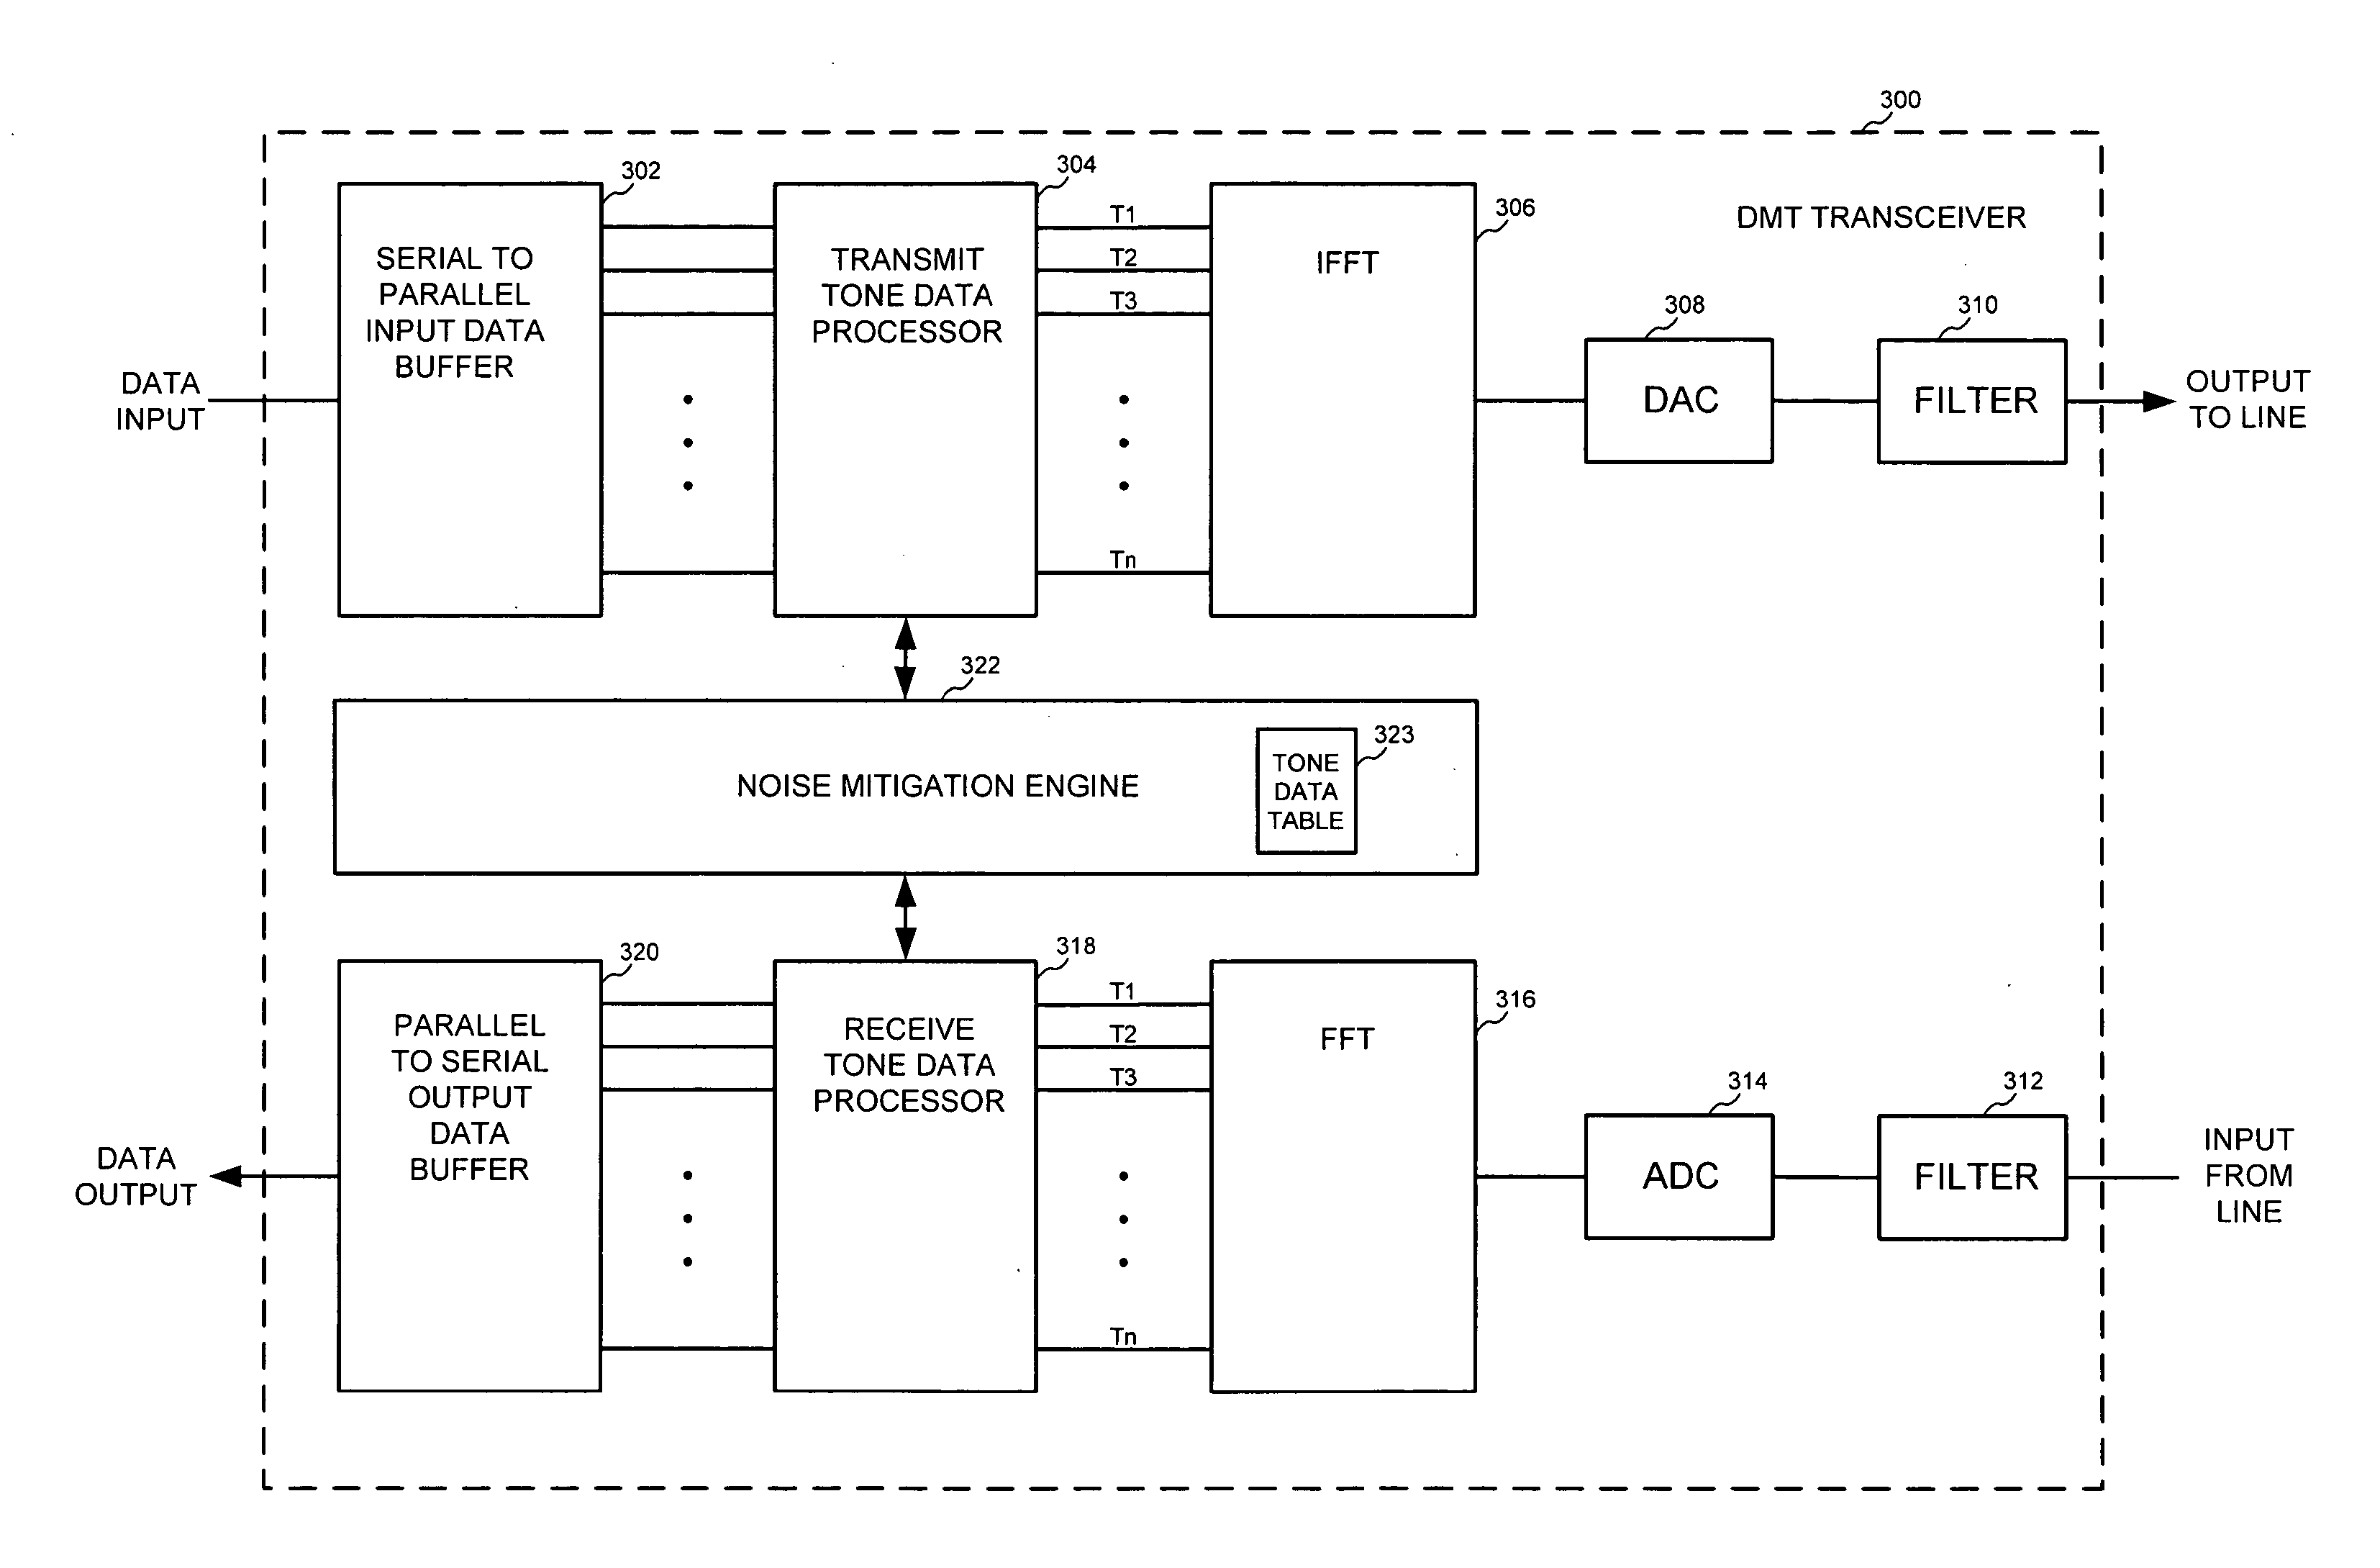 Digital subscriber line noise mitigation techniques, and applications thereof